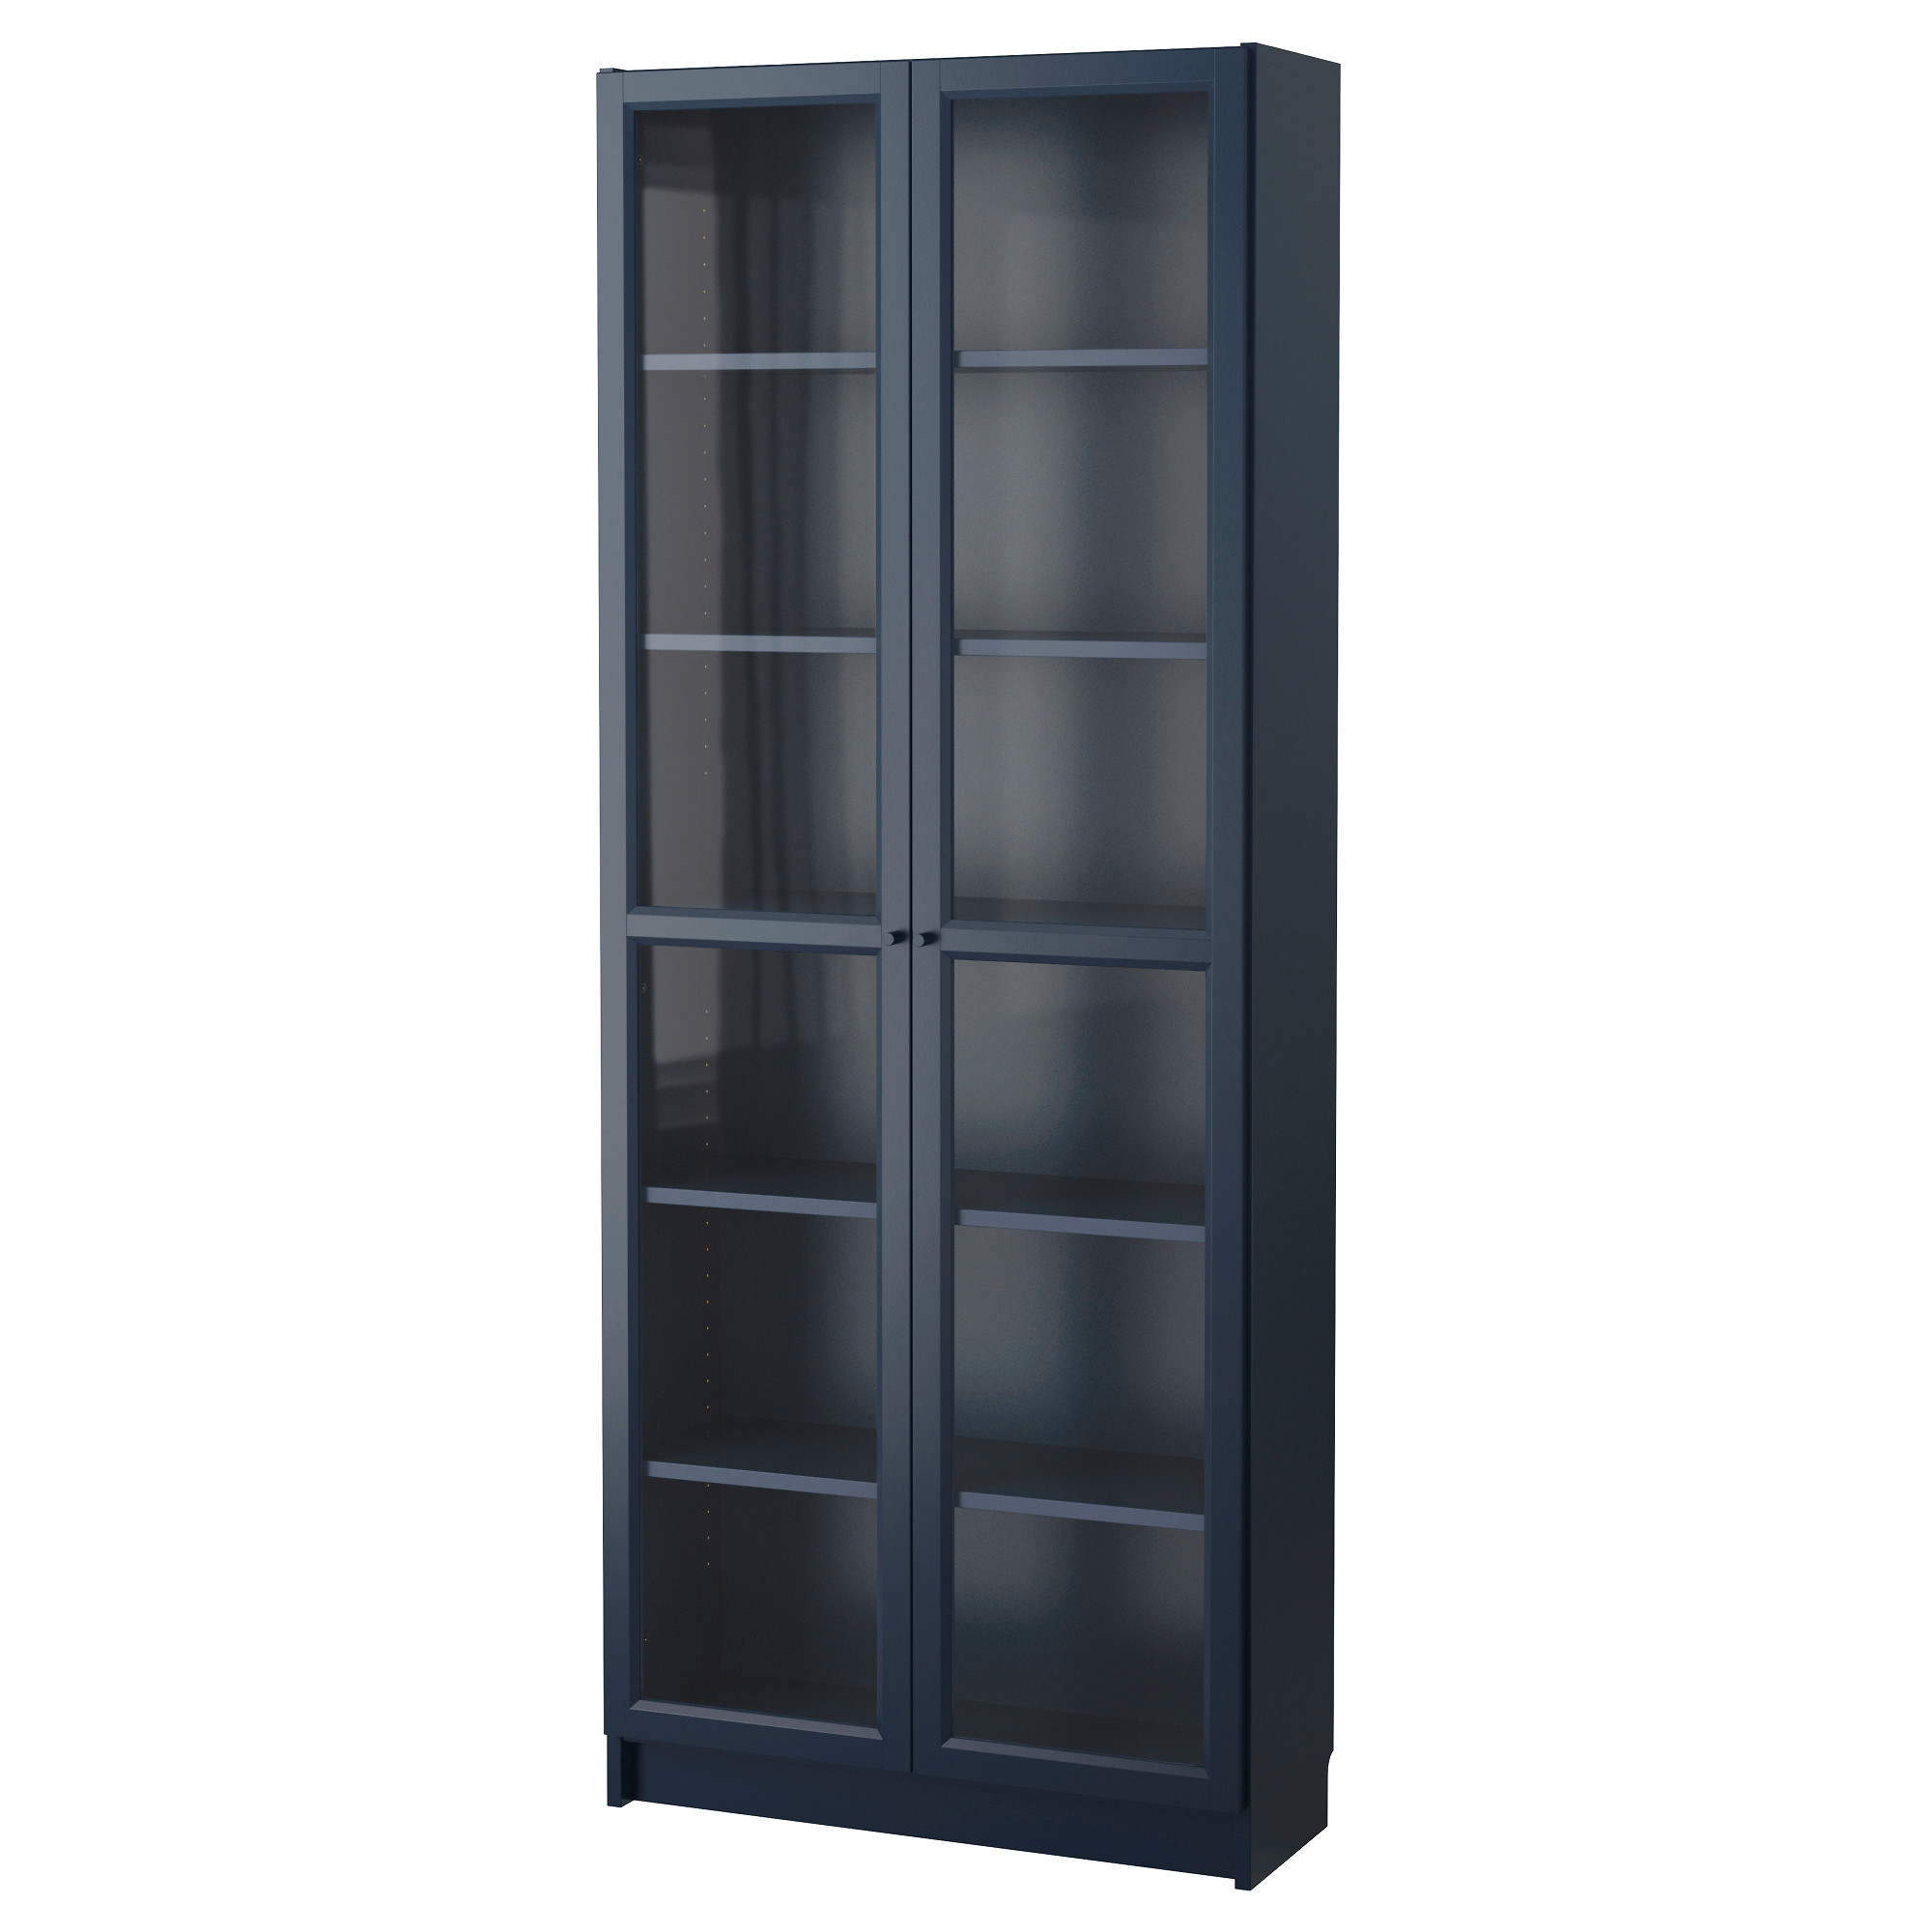 bookcases billy bookcase with glass doors - dark blue - ikea OKGXAWF